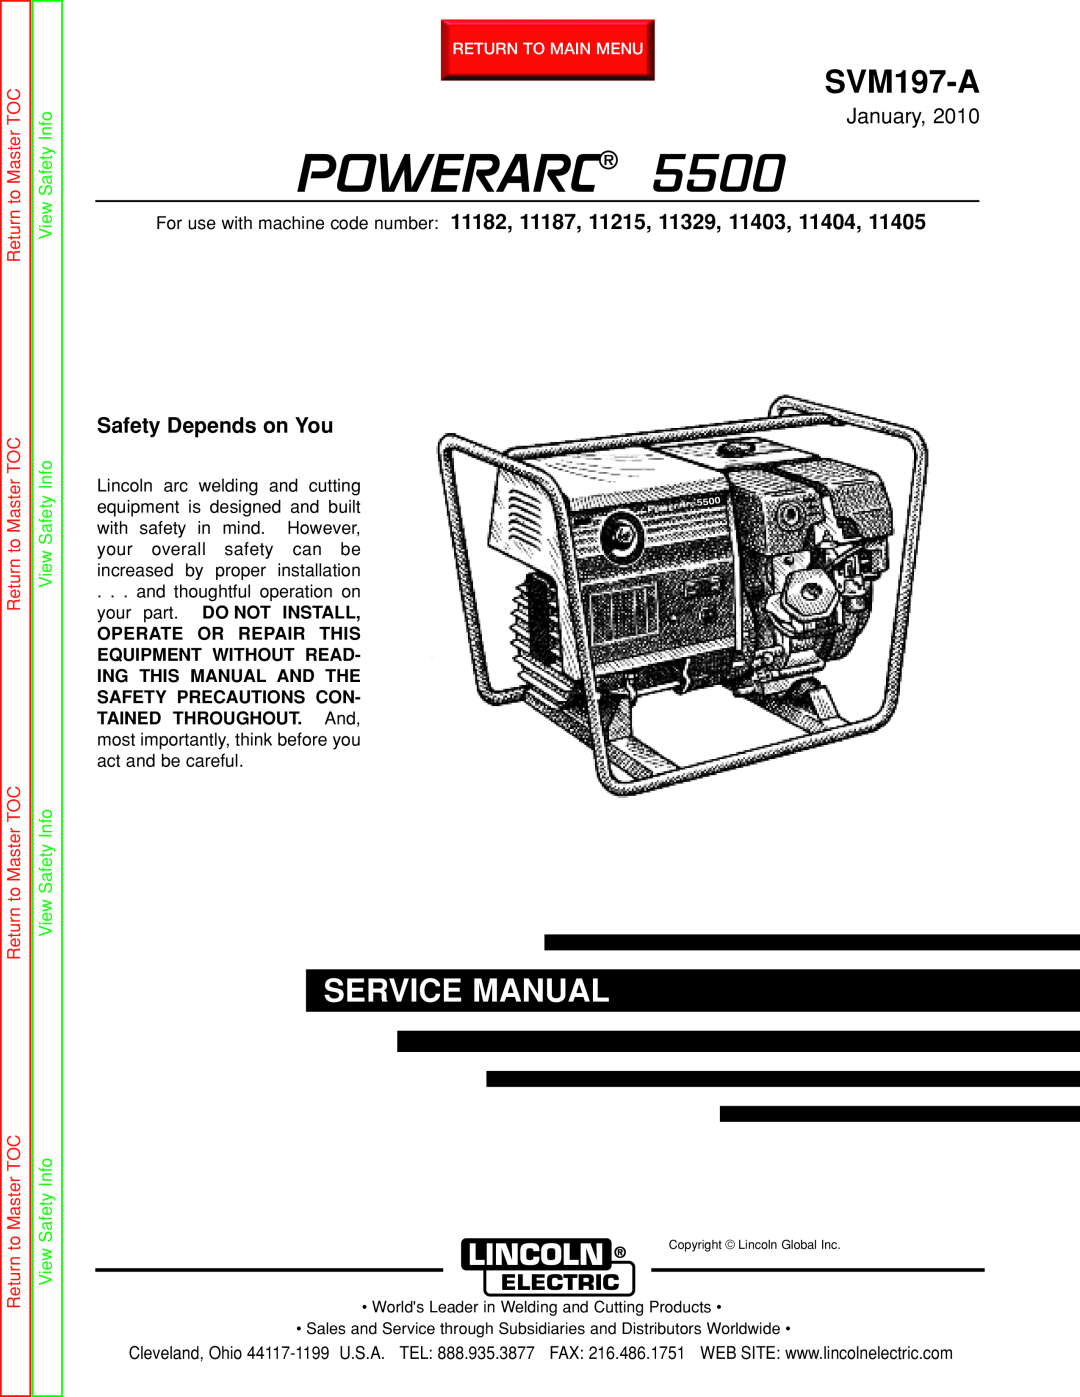 Lincoln Electric SVM197-A service manual Safety Depends on You, Powerarc, Service Manual, January, Return to Master TOC 